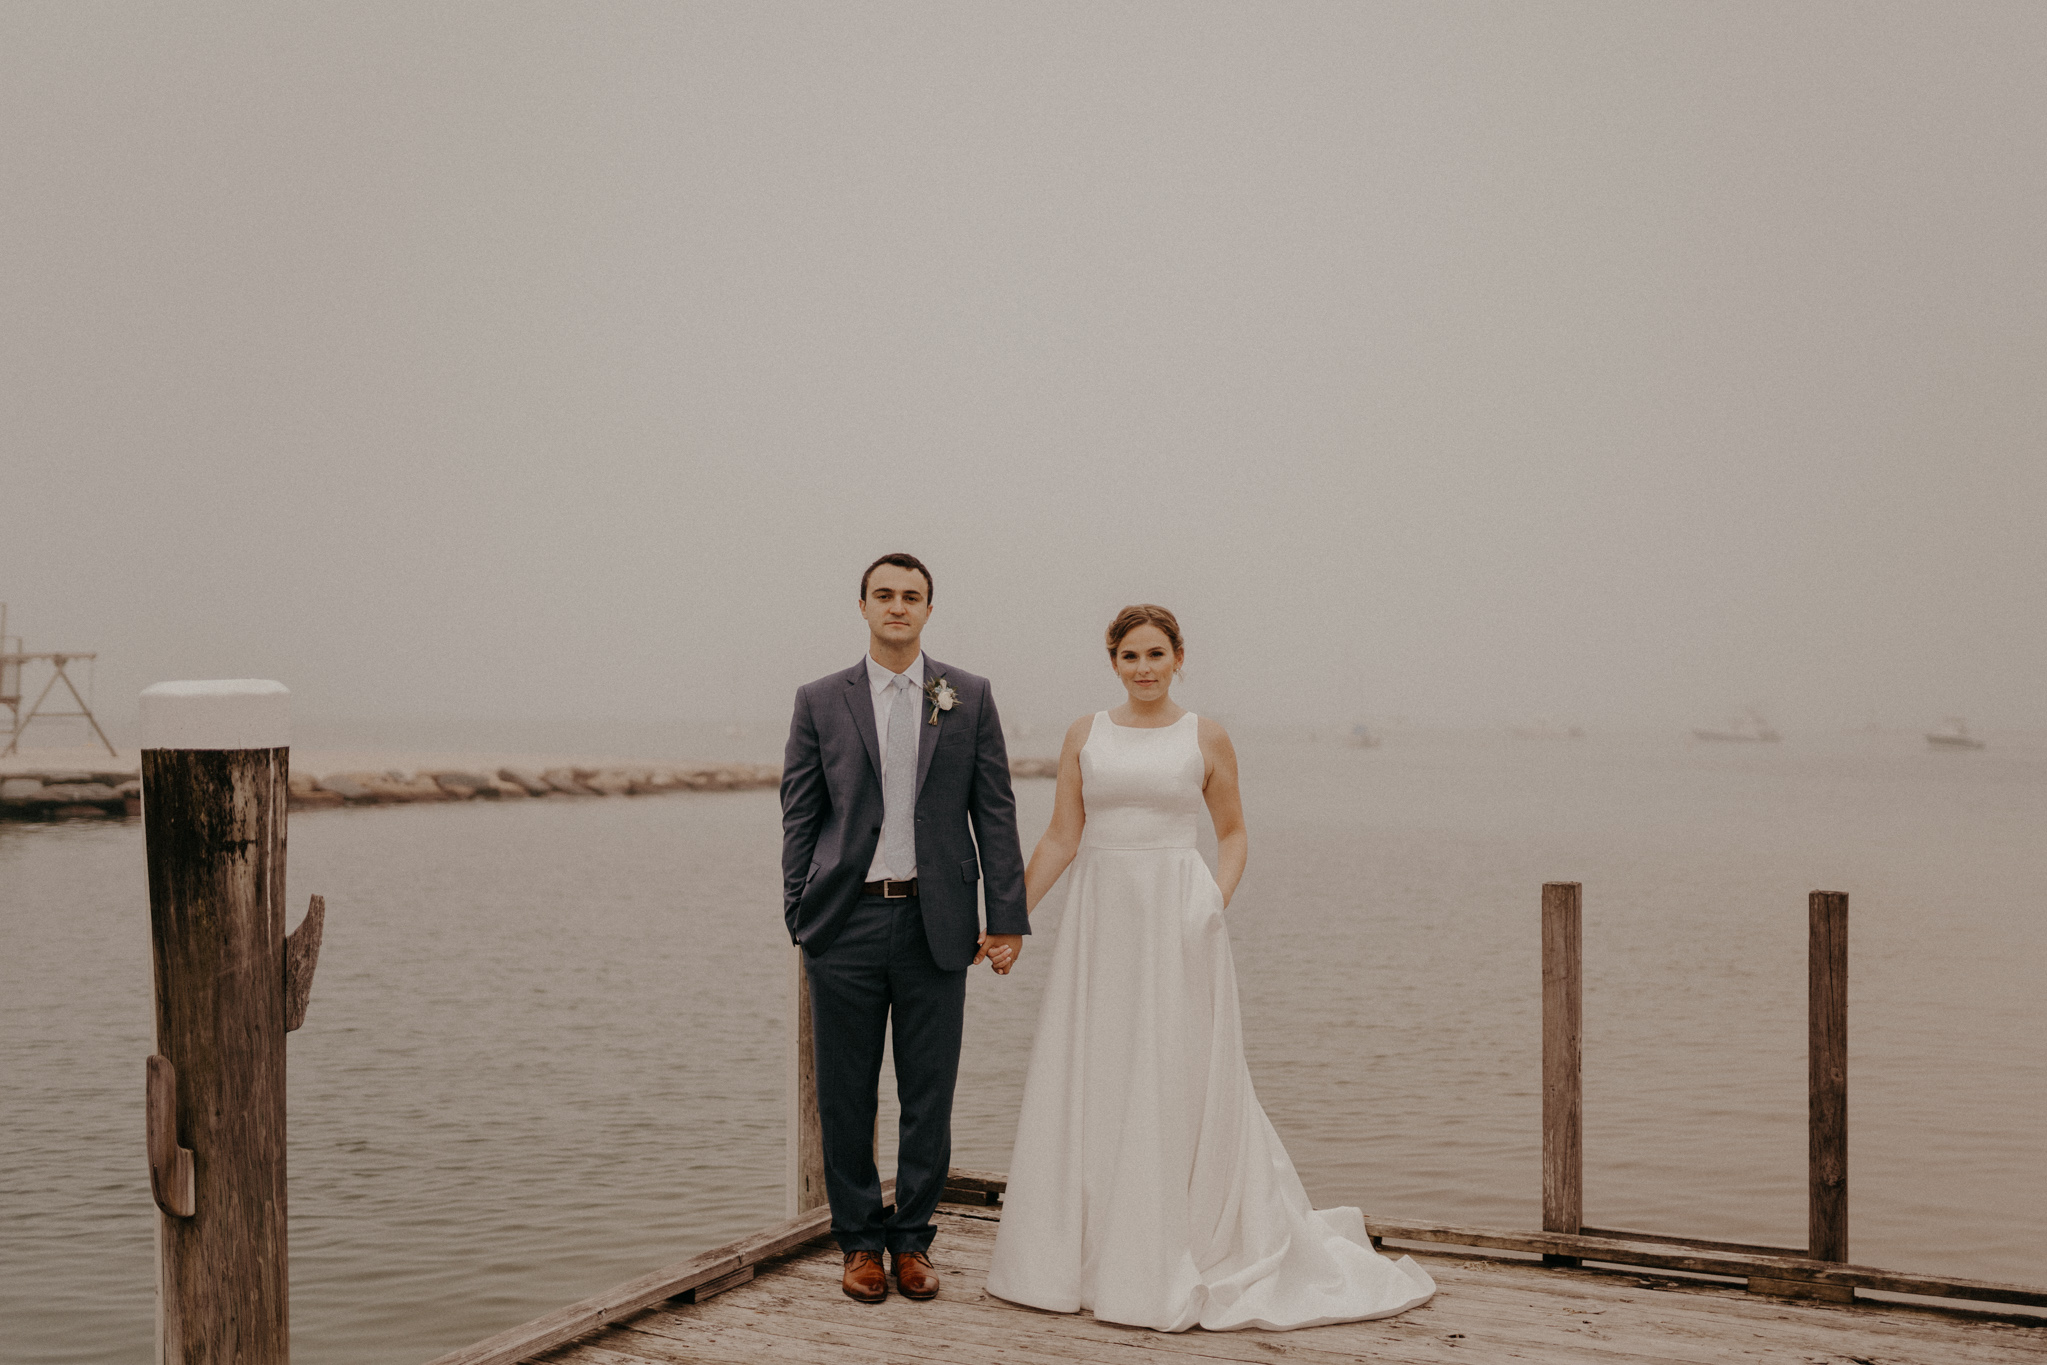 Foggy cape cod wedding in harwich, massachusetts with dusty blues and moody vibes by destination elopement photographer